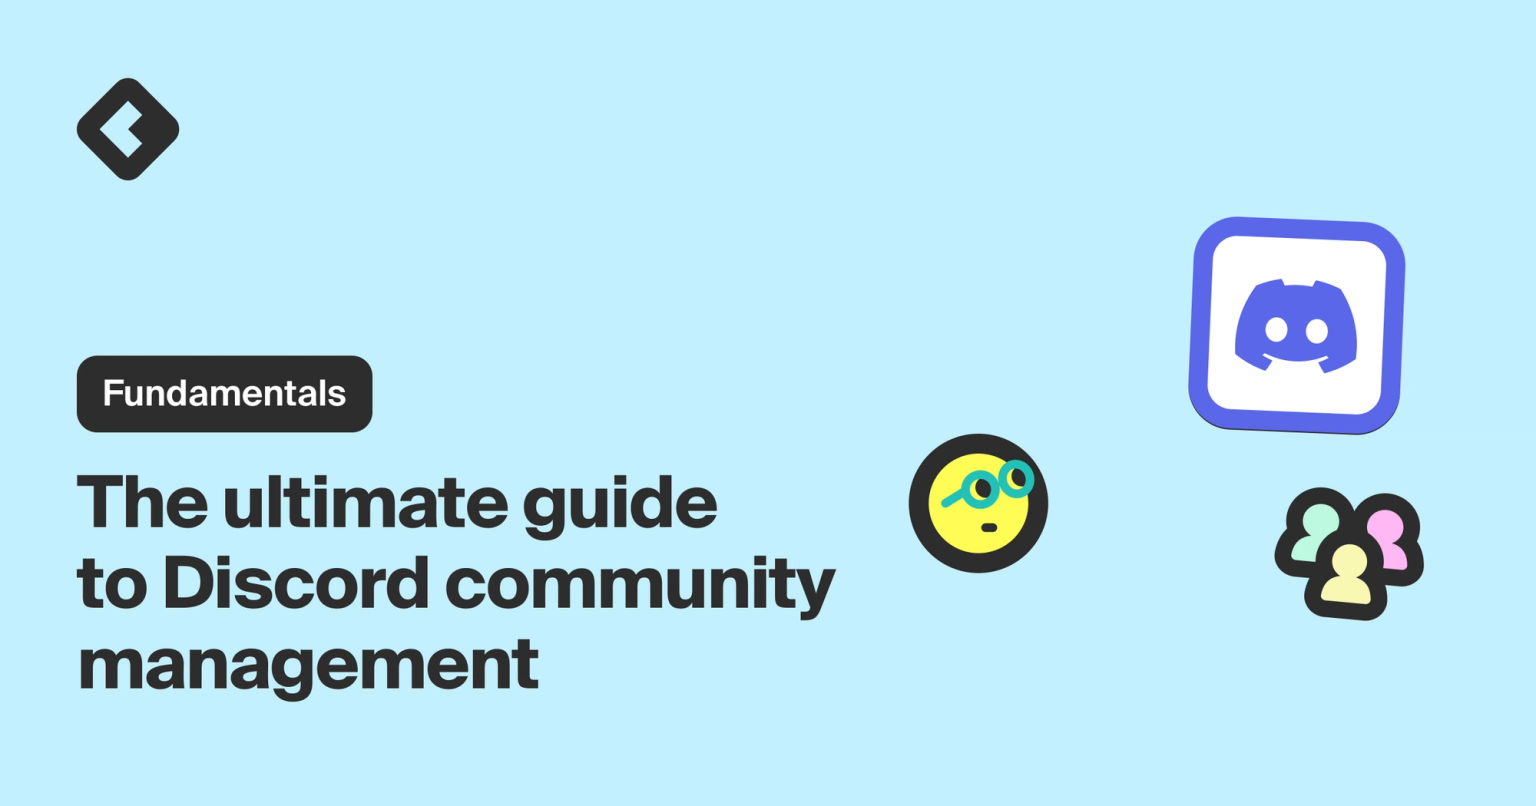 Title "The ultimate guide to Discord community management," categorized under "Fundamentals," and is adorned with Discord's iconic logo and related emoticons, indicating an educational resource for managing Discord communities.